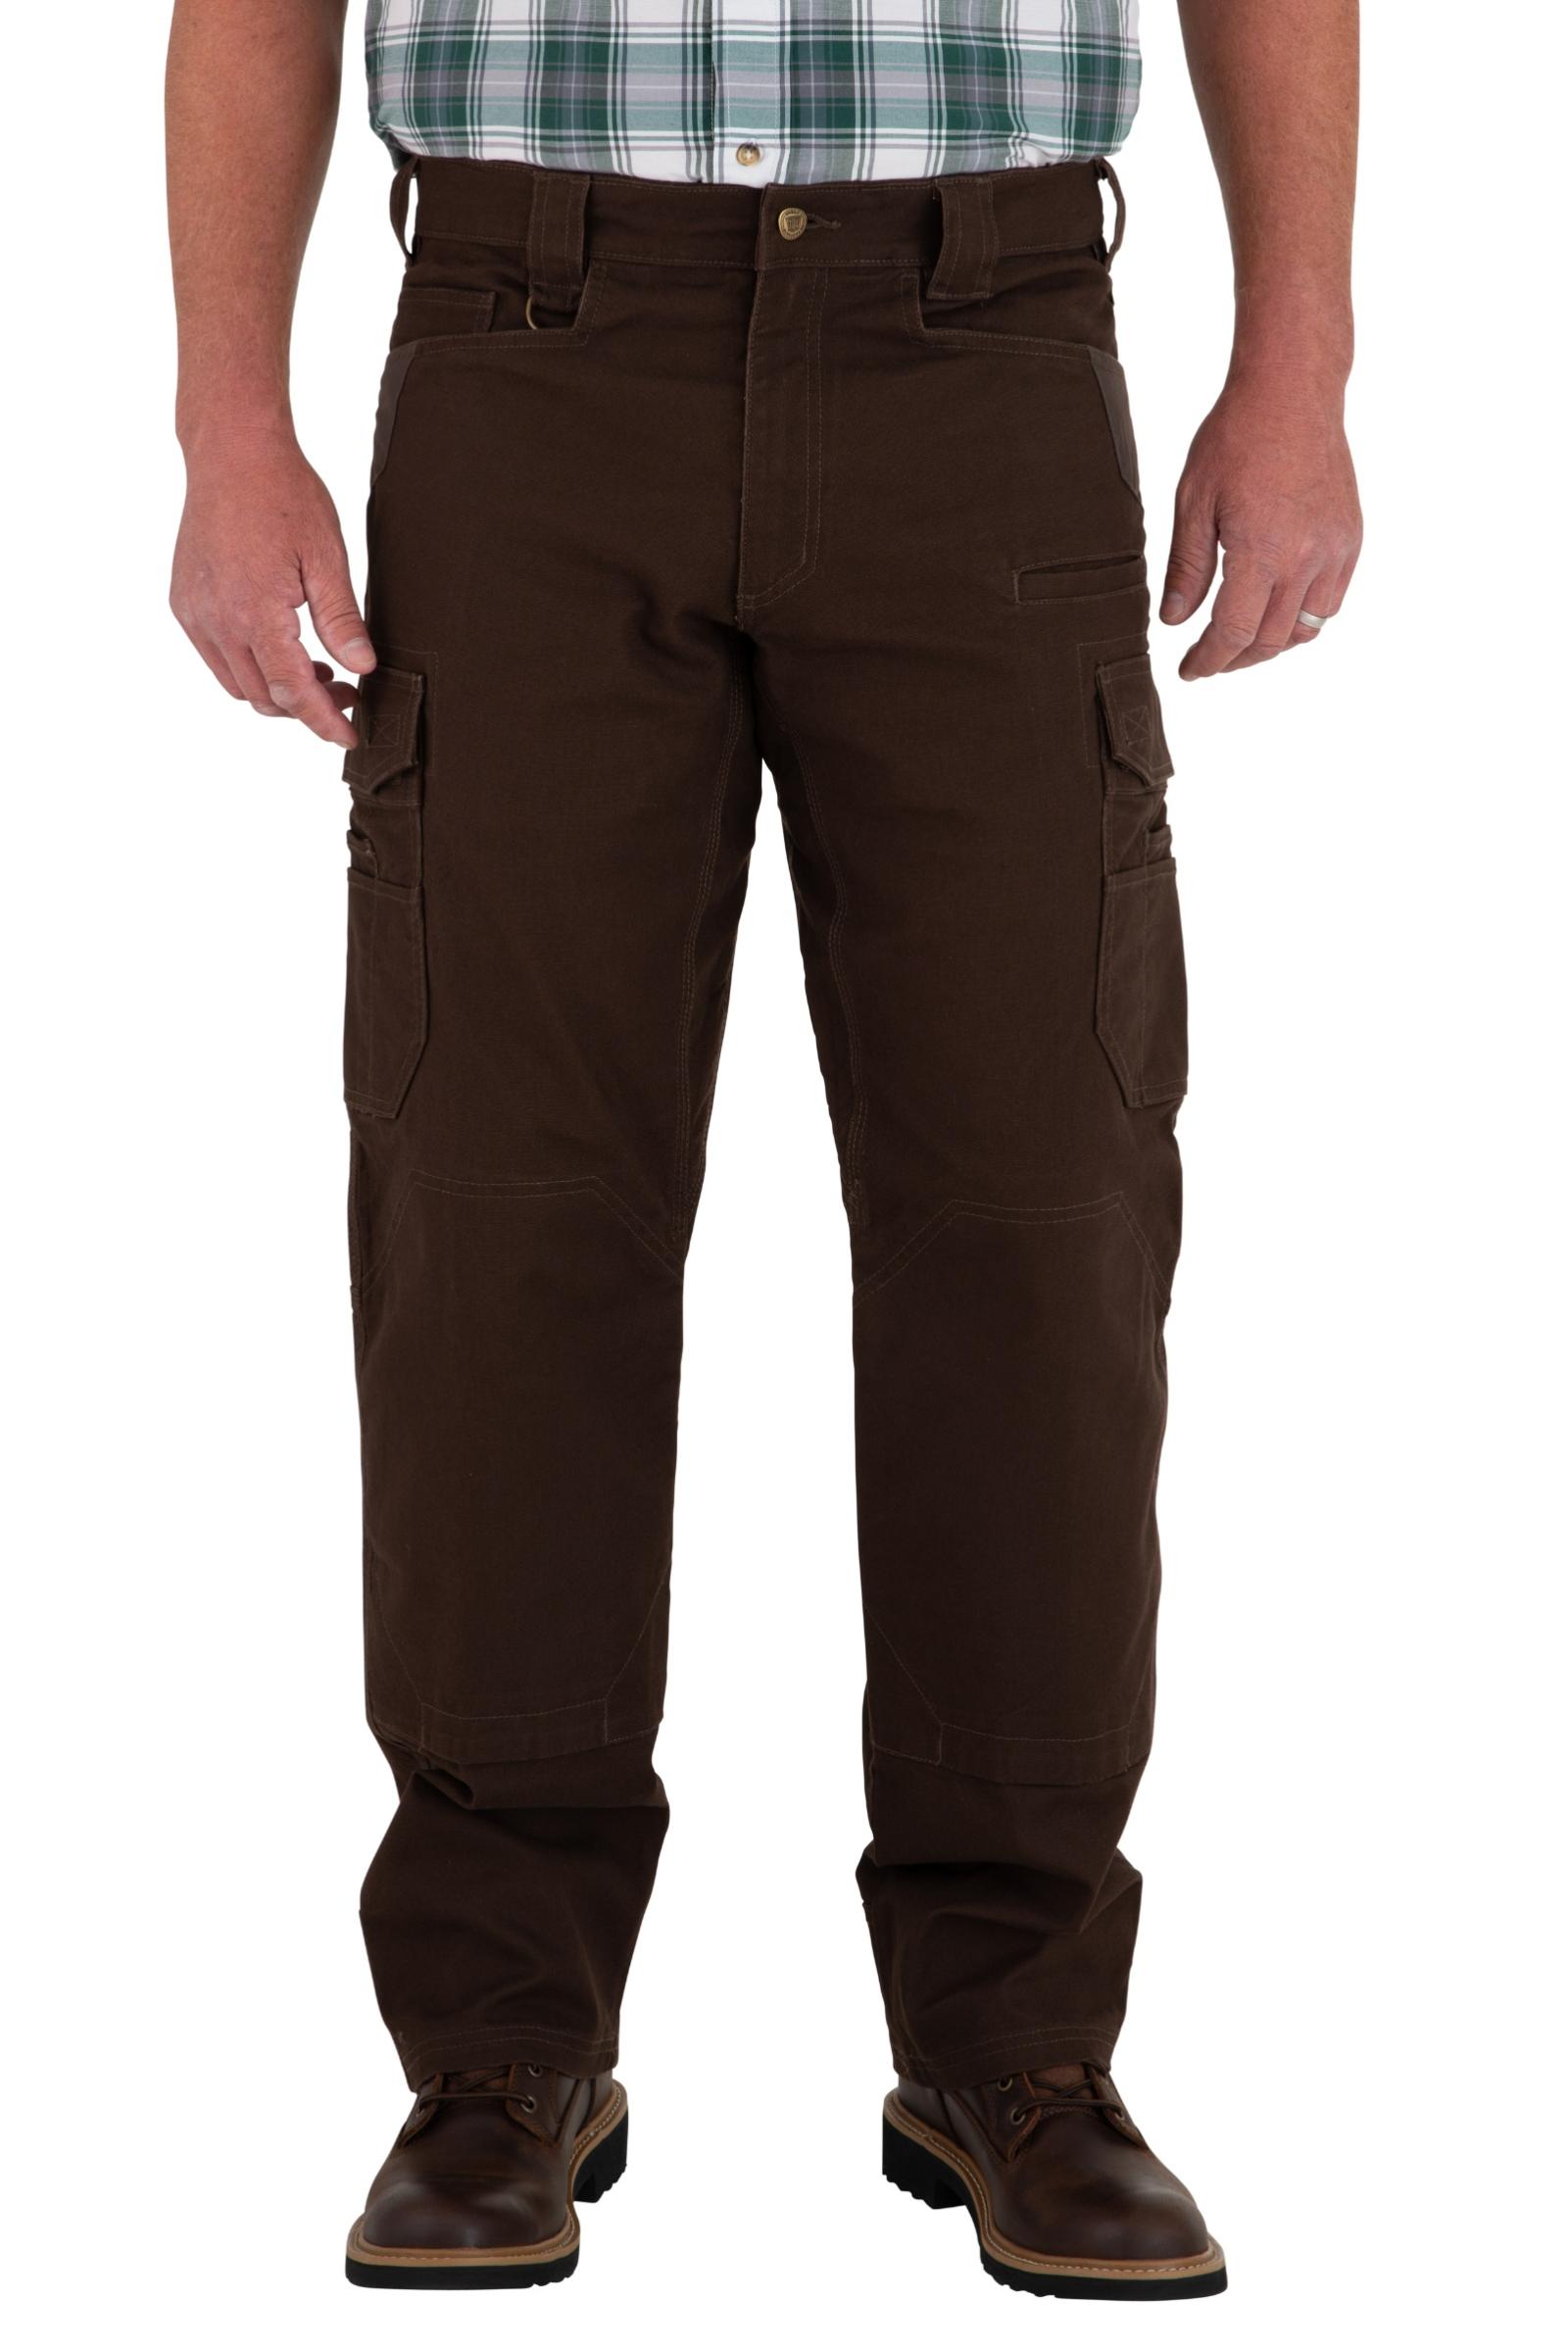 Noble Outfitters Men's FullFlexx HD Hammer Drill Cargo Canvas Pants